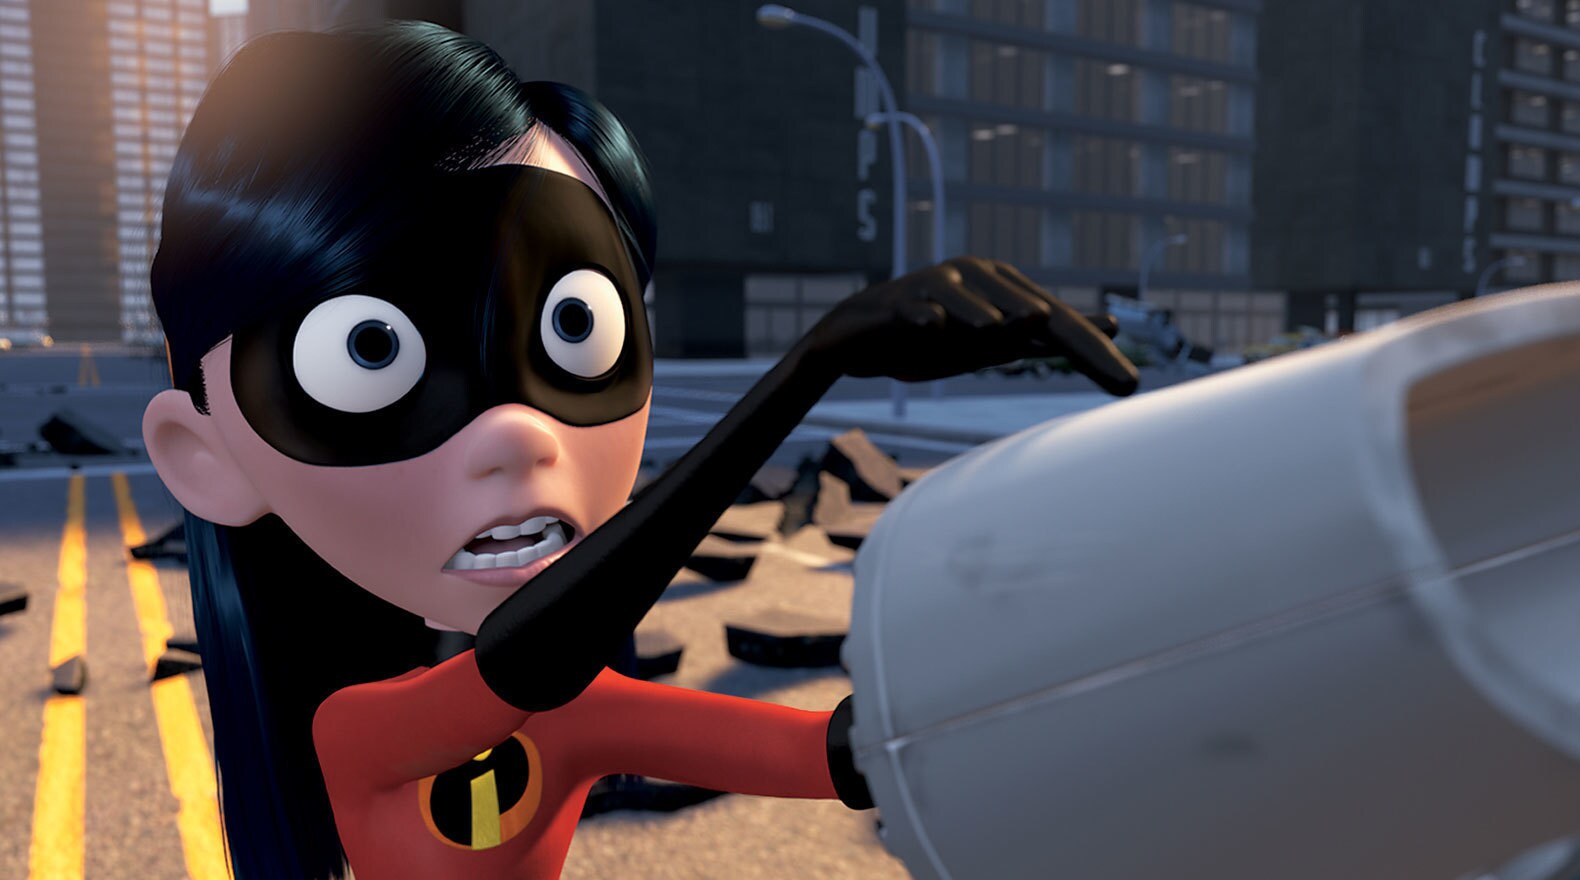 The Incredibles | Official Site | Disney Movies